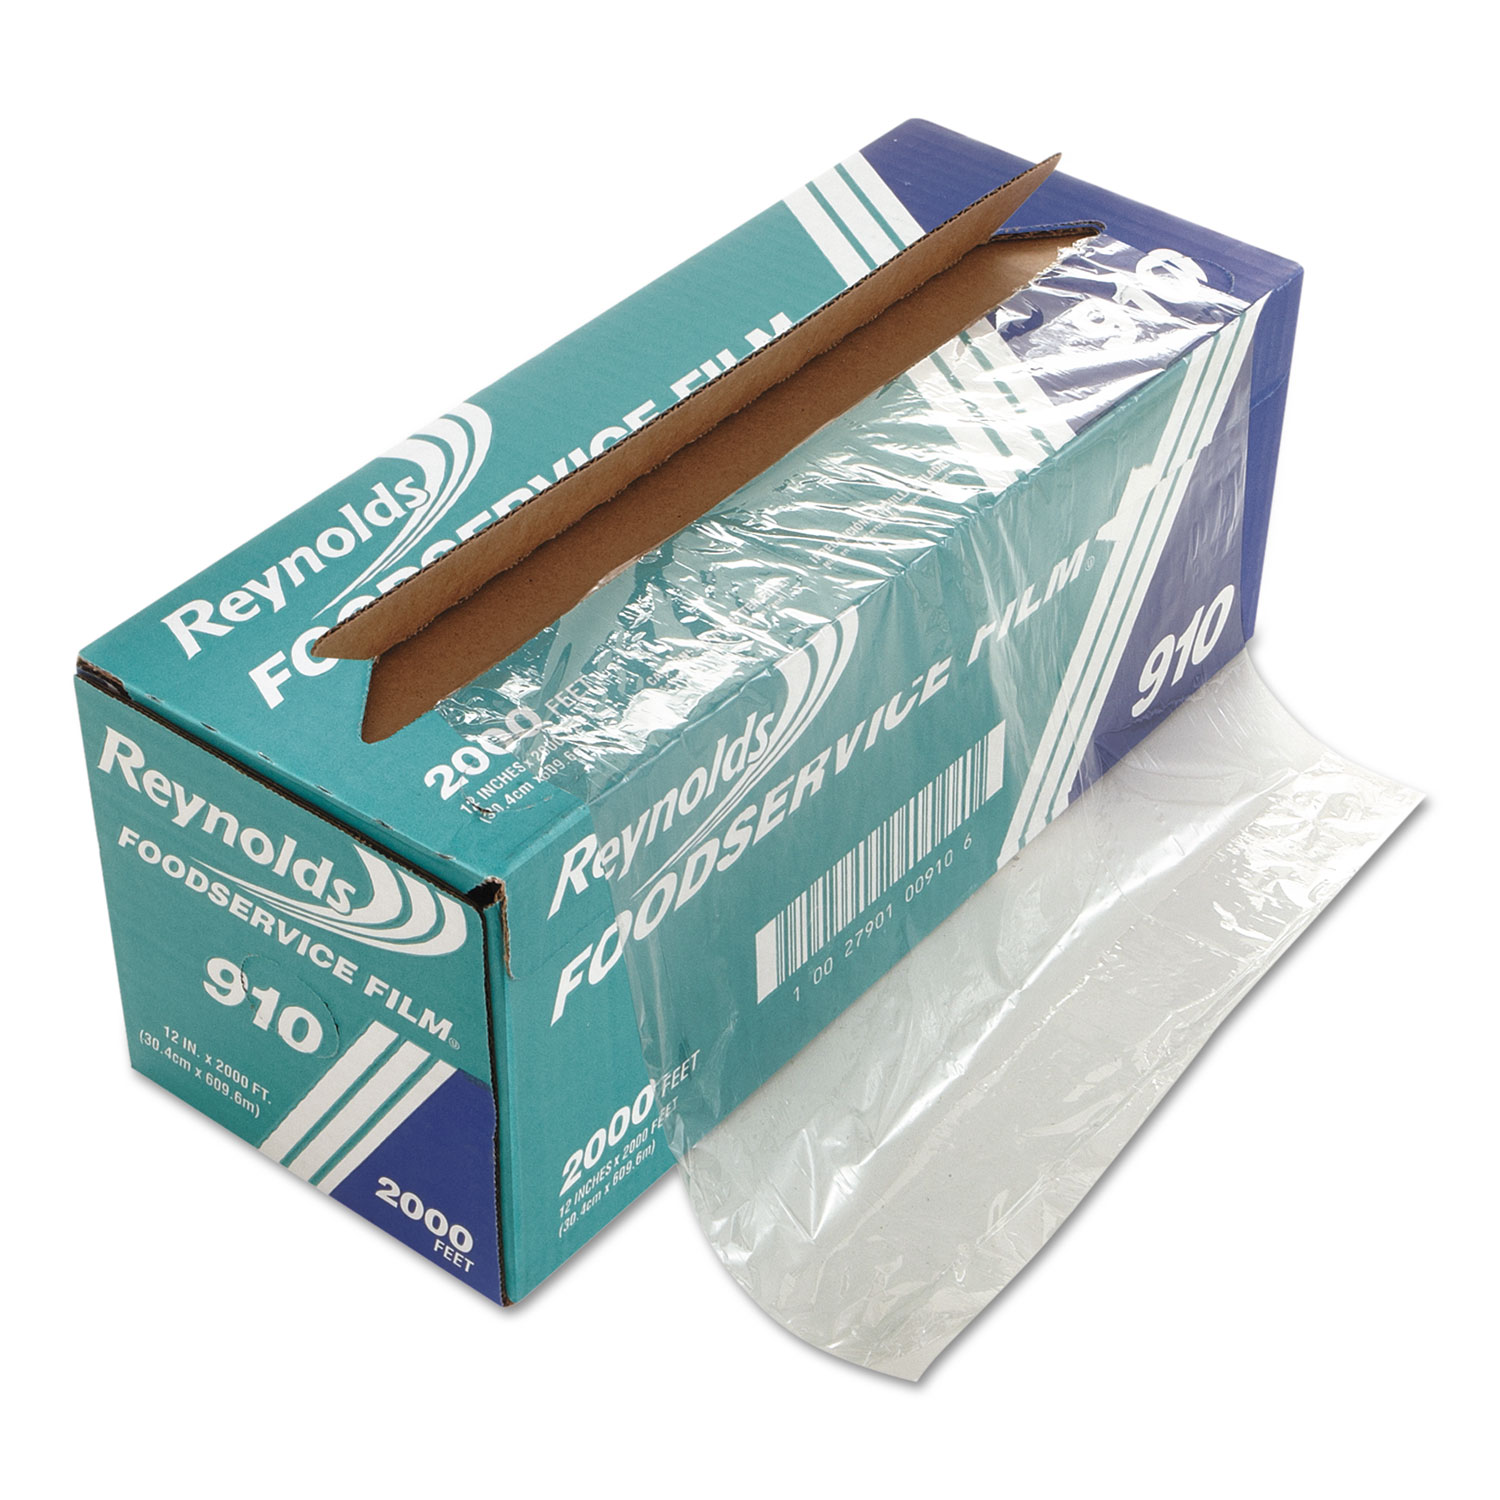  Reynolds Wrap 000000000000000910 PVC Film Roll with Cutter Box, 12 x 2000 ft, Clear (RFP910) 